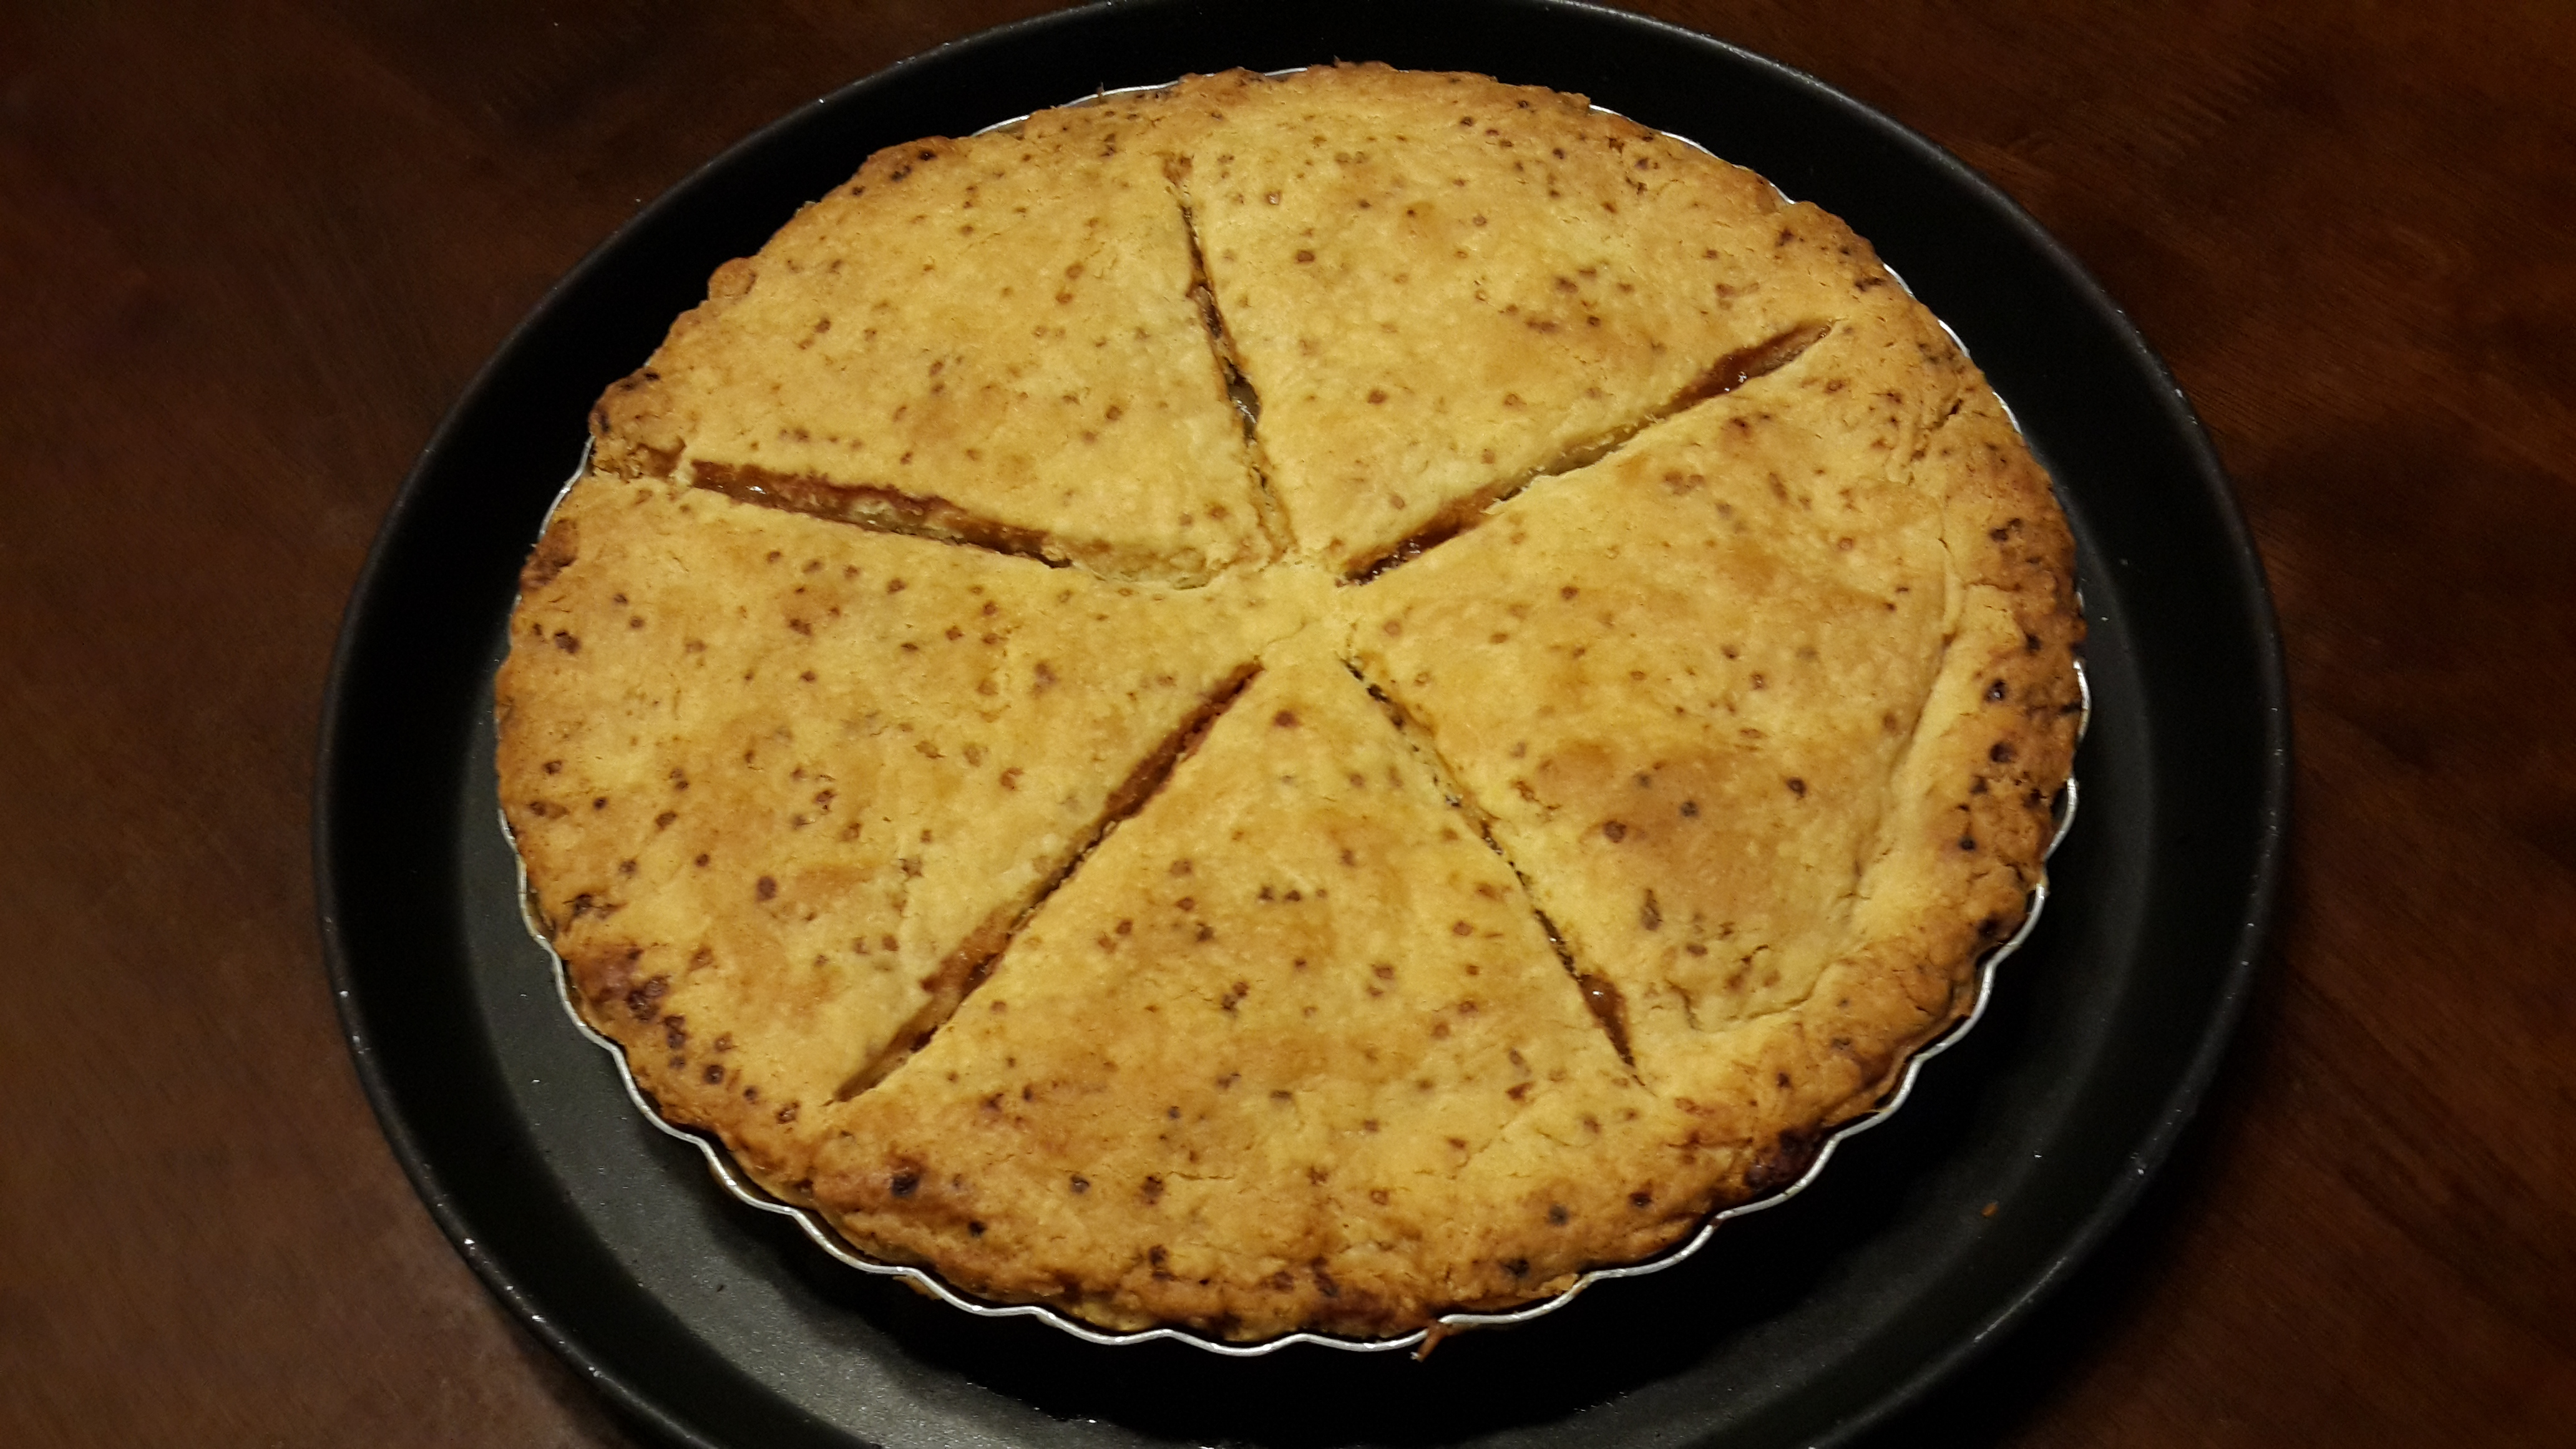 Just baked Apple Pie